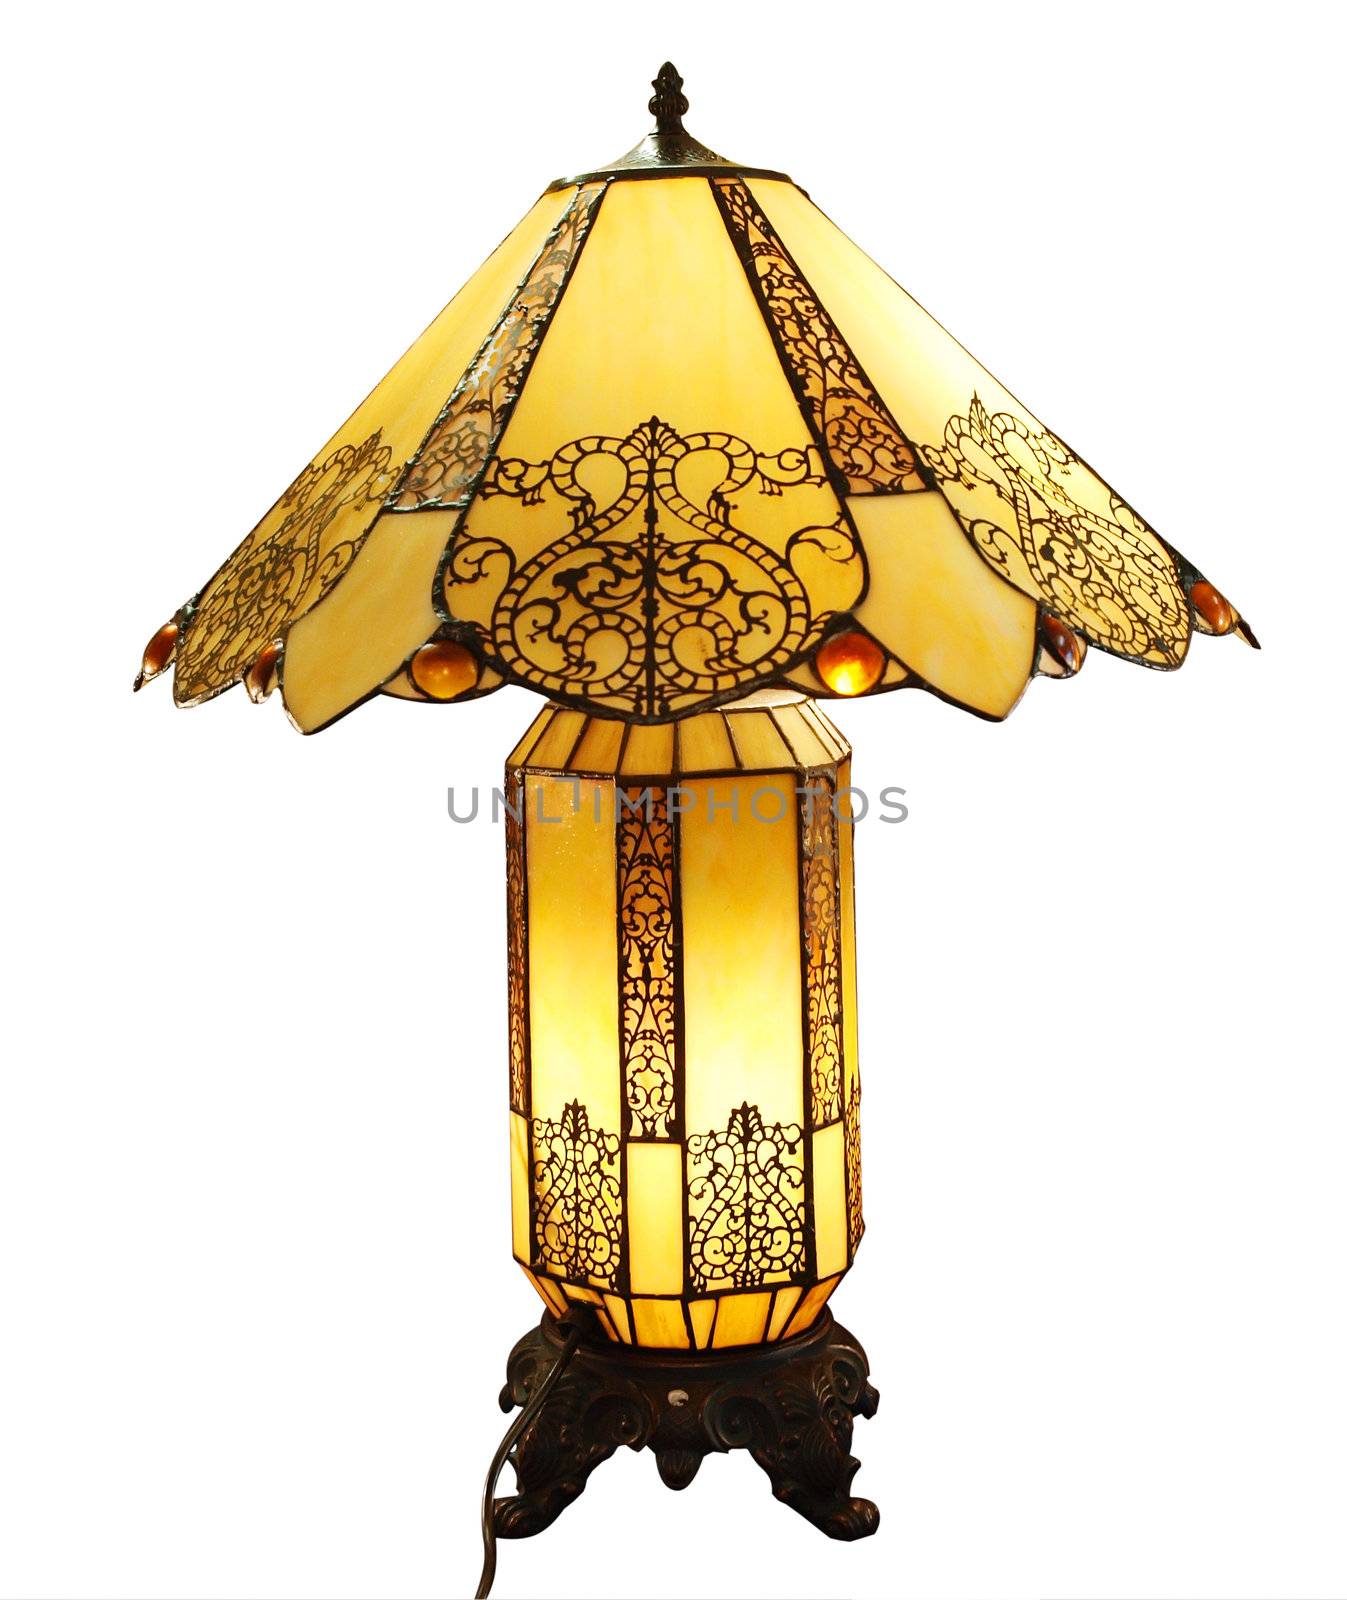 Antique Lamp by MargoJH